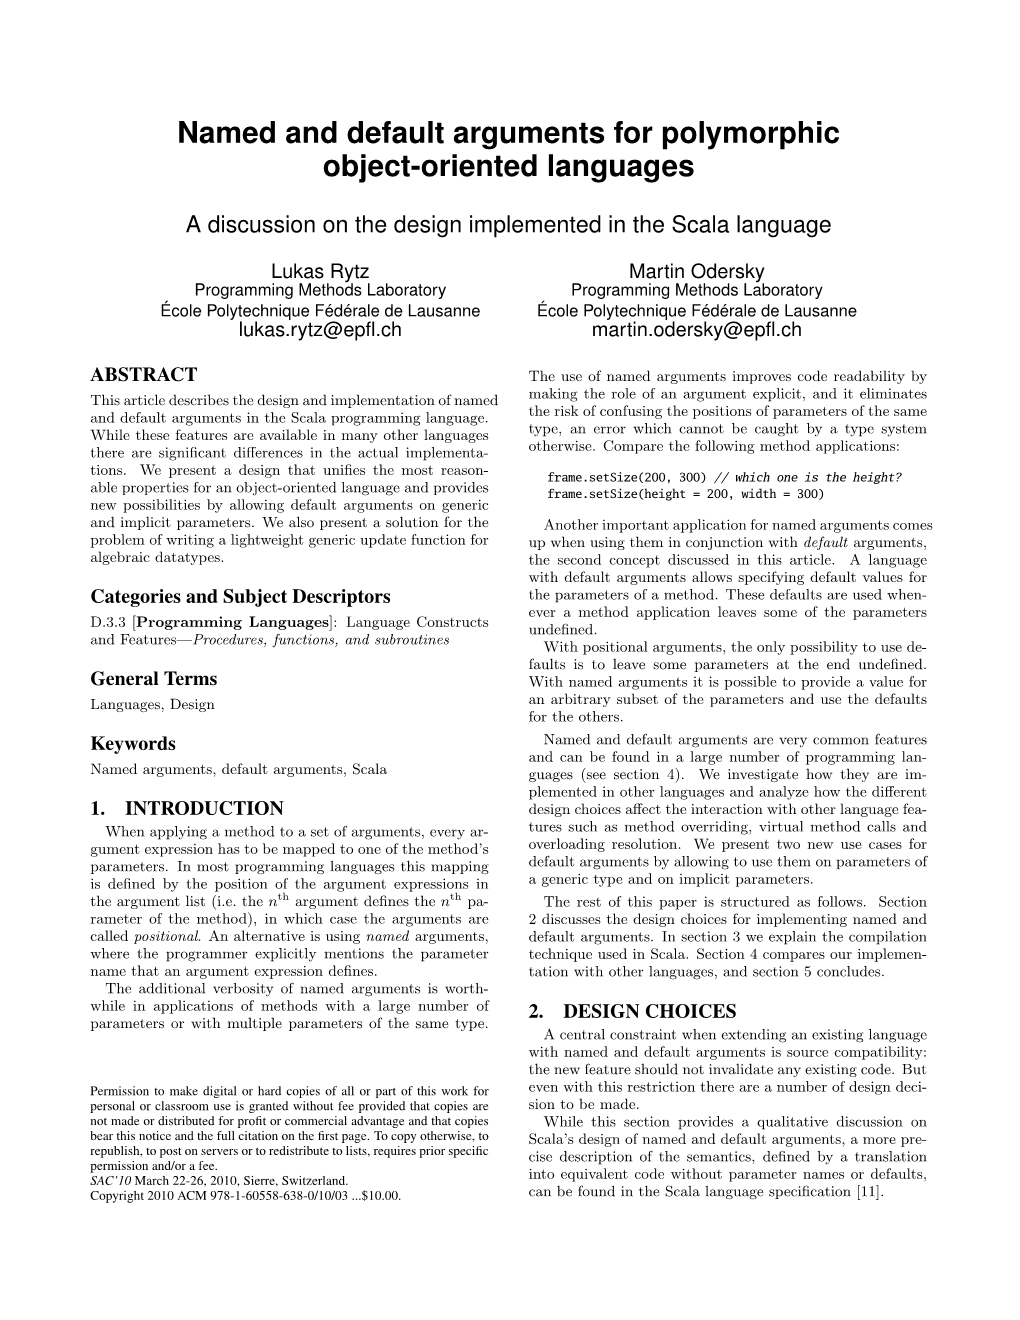 Named and Default Arguments for Polymorphic Object-Oriented Languages